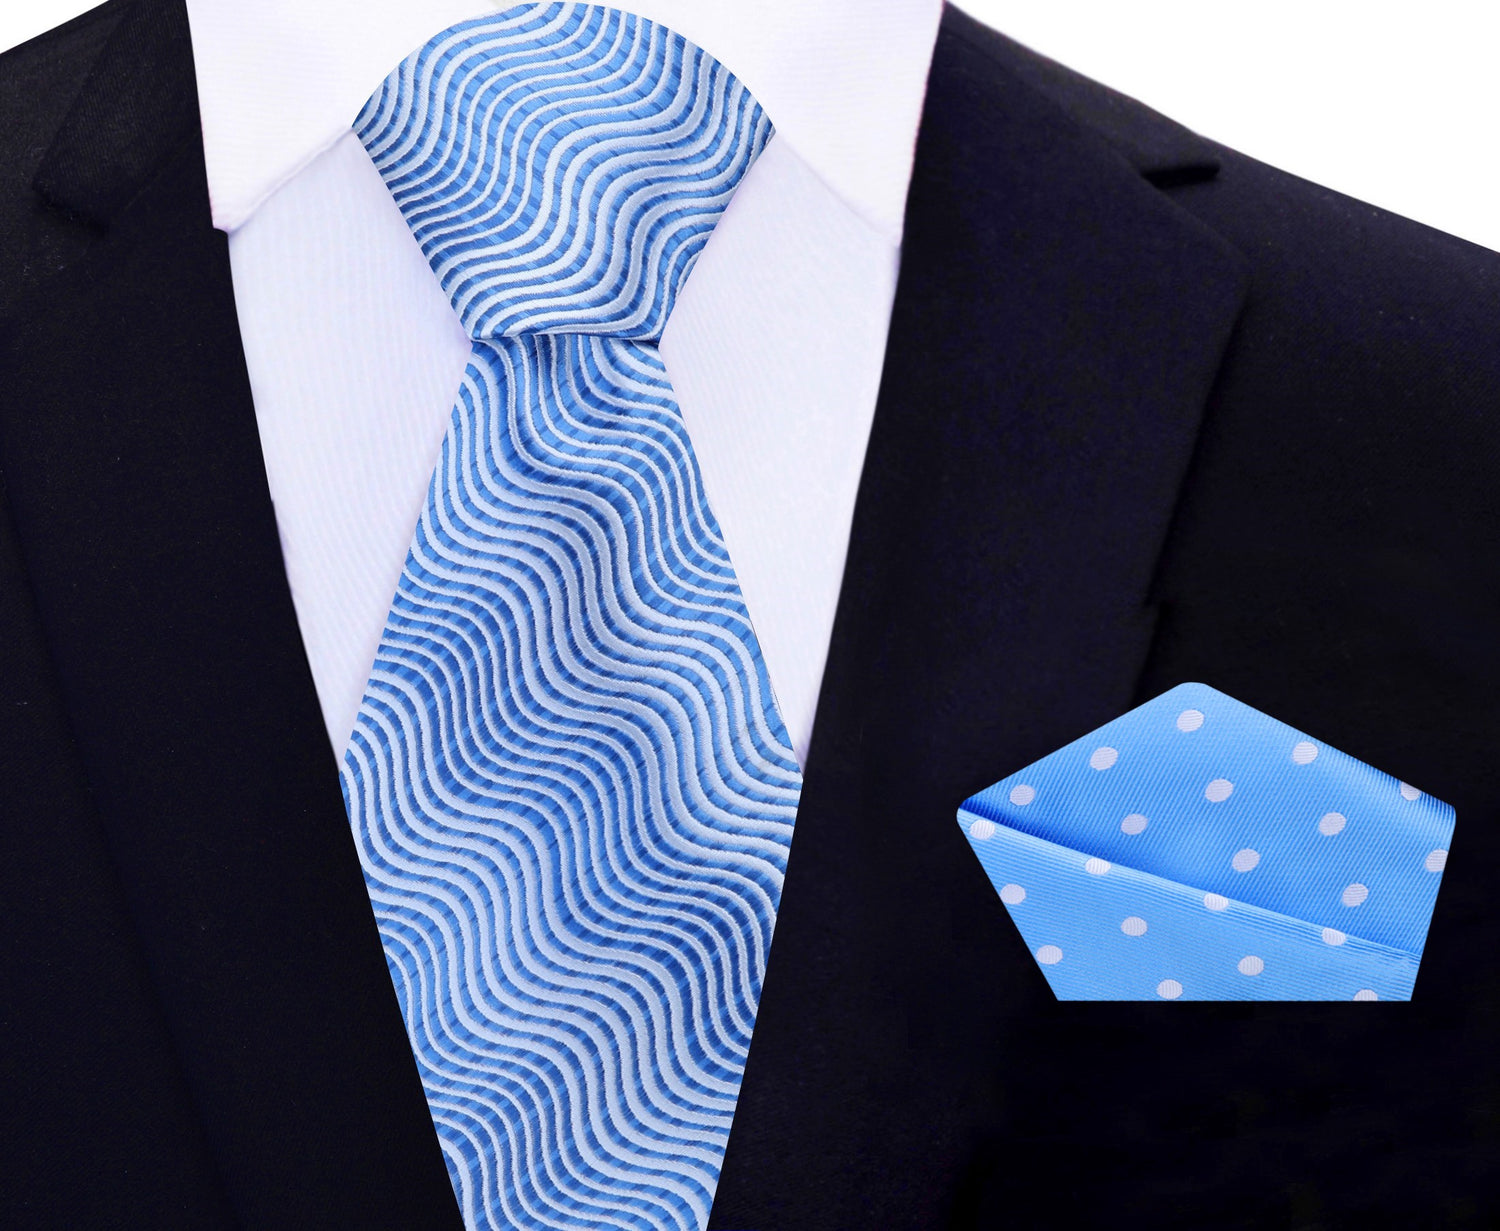 Shades of Blue Wavy Lines Necktie with Light Blue, White Polka Pocket Square